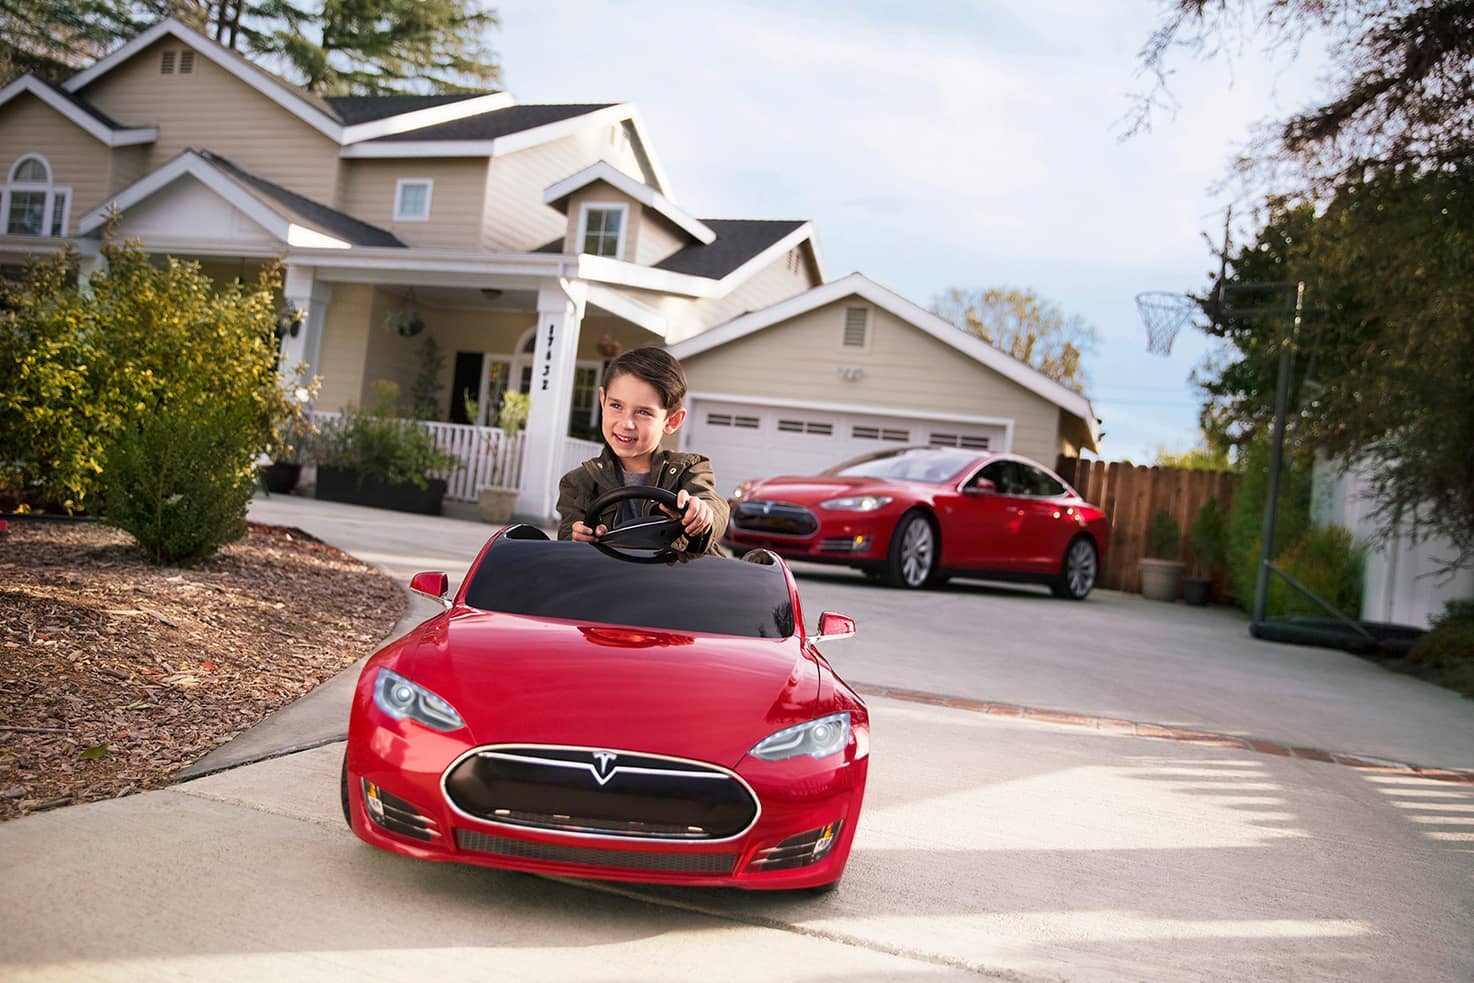 This Tiny Model S By Tesla And Radio Flyer Is A Must For Your Kid!